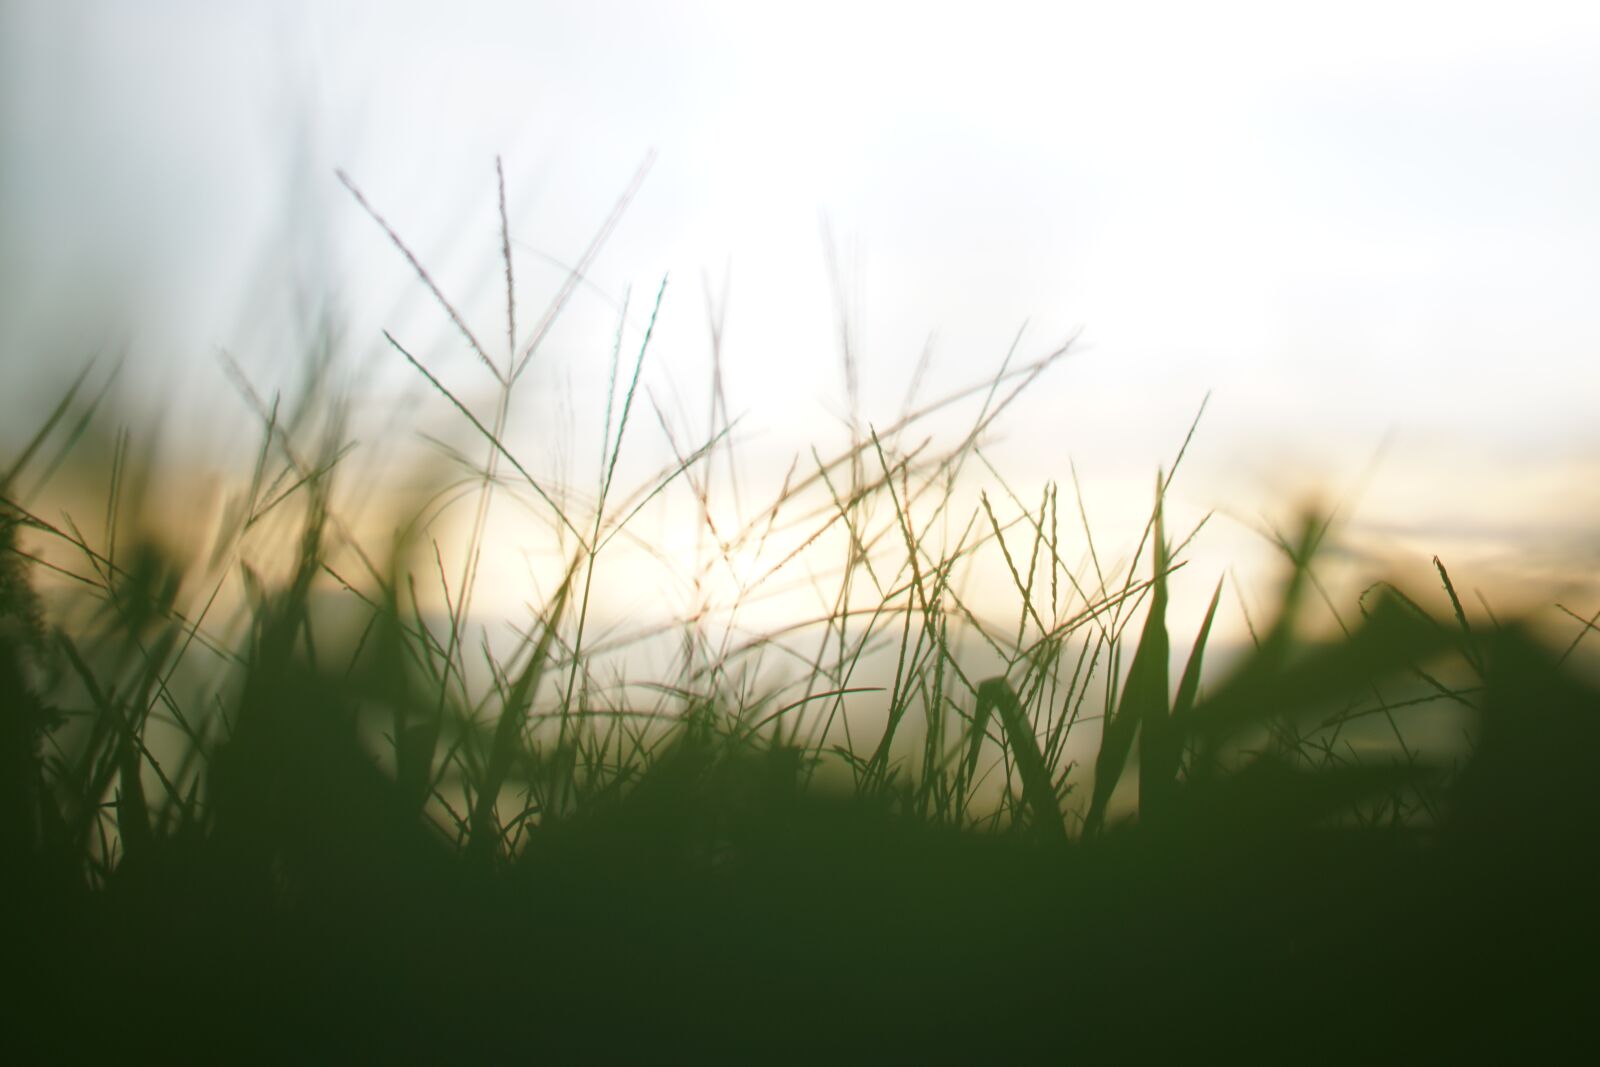 Sony a6000 sample photo. Grass, field, nature photography